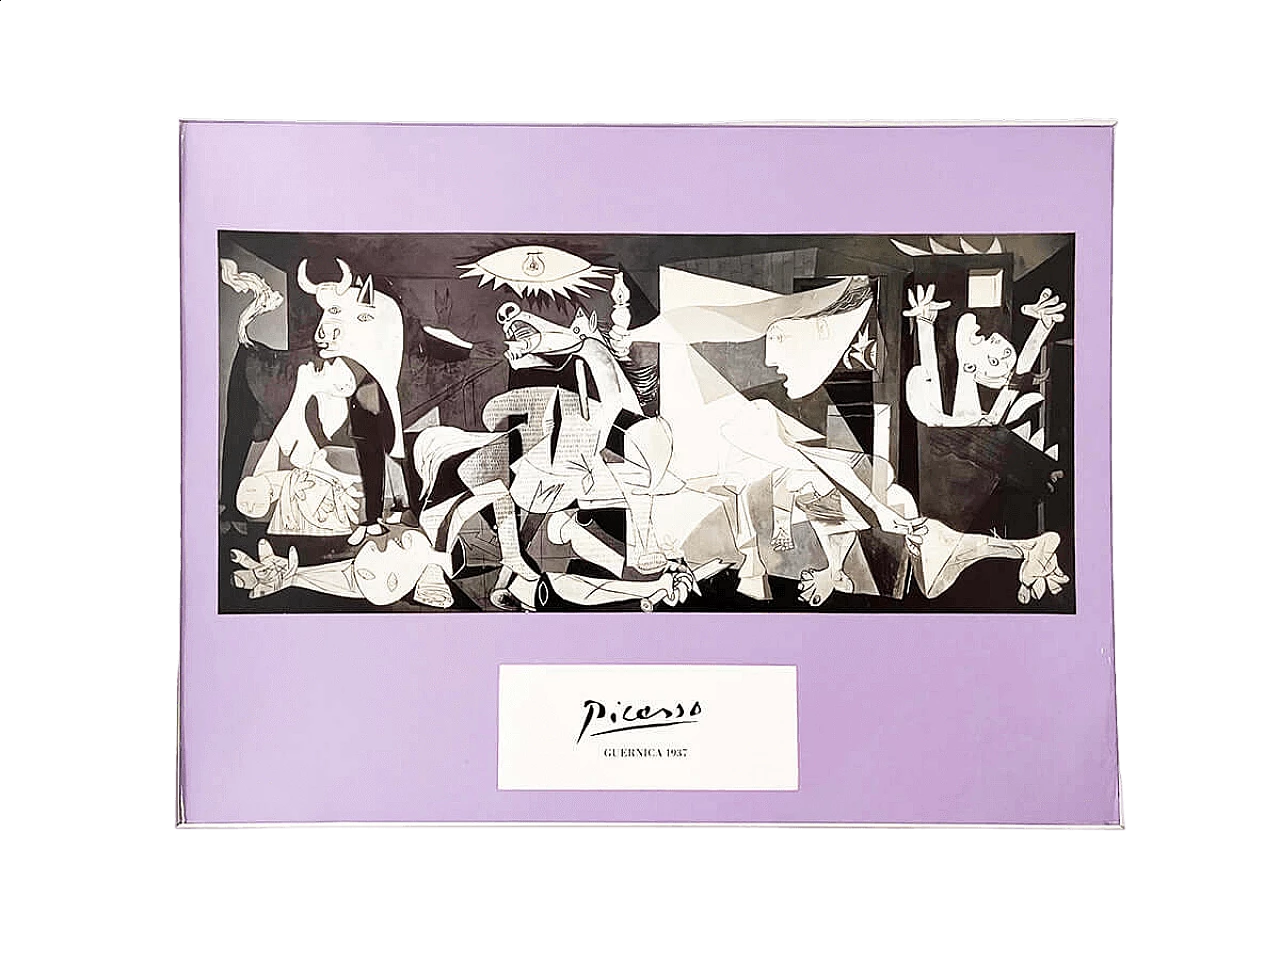 Poster of Guernica by Pablo Picasso, 1937 4